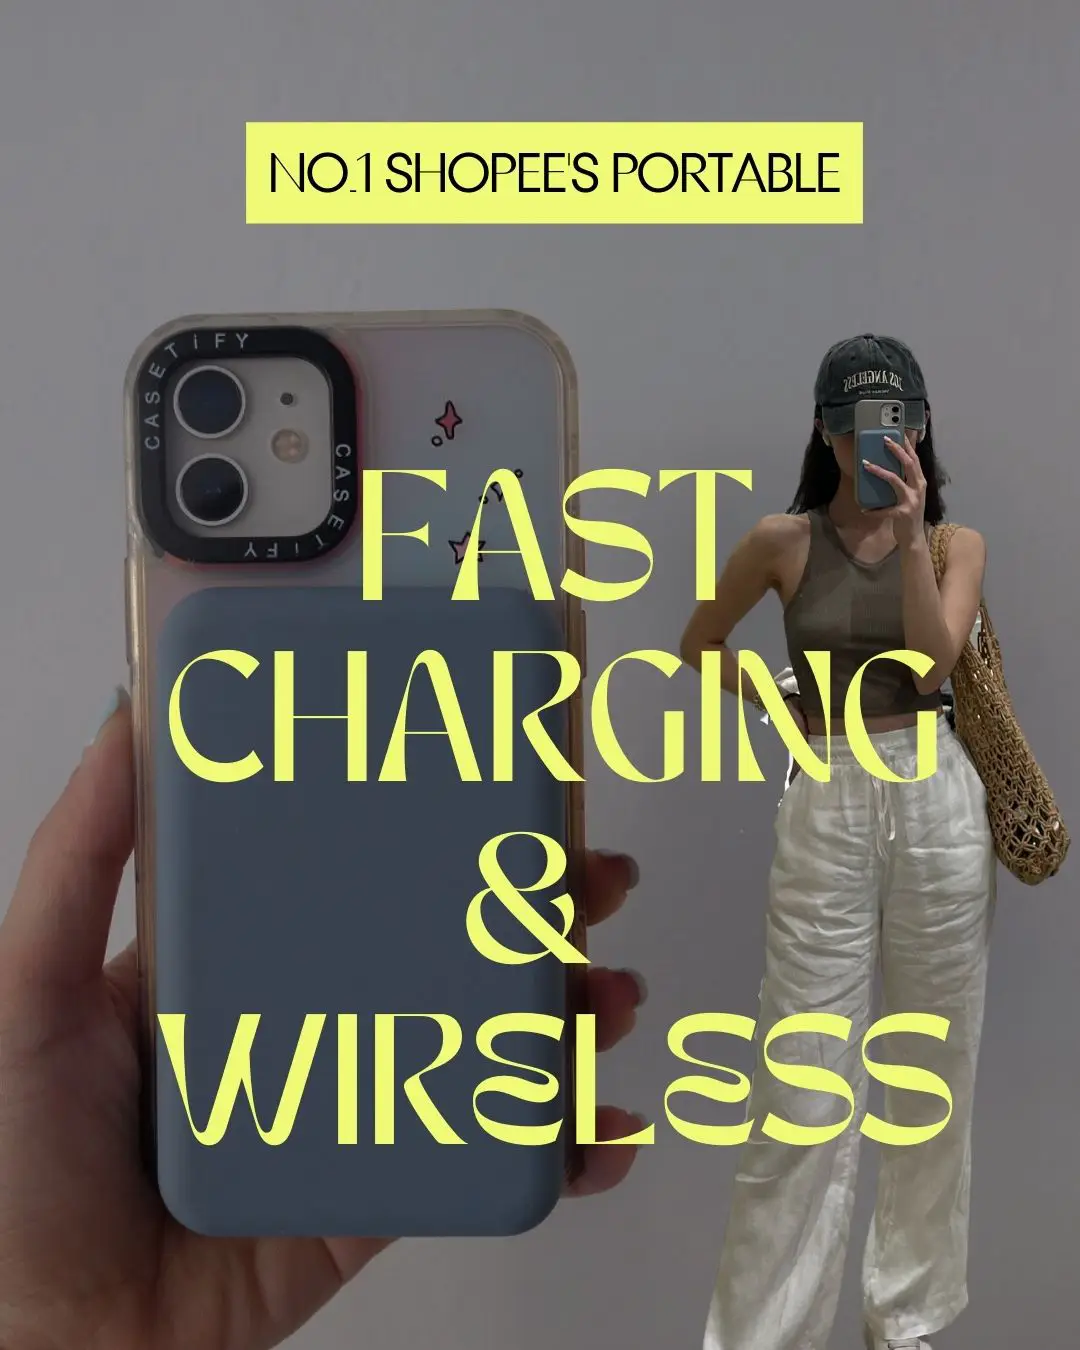 fast wireless charger for iphone - Lemon8 Search